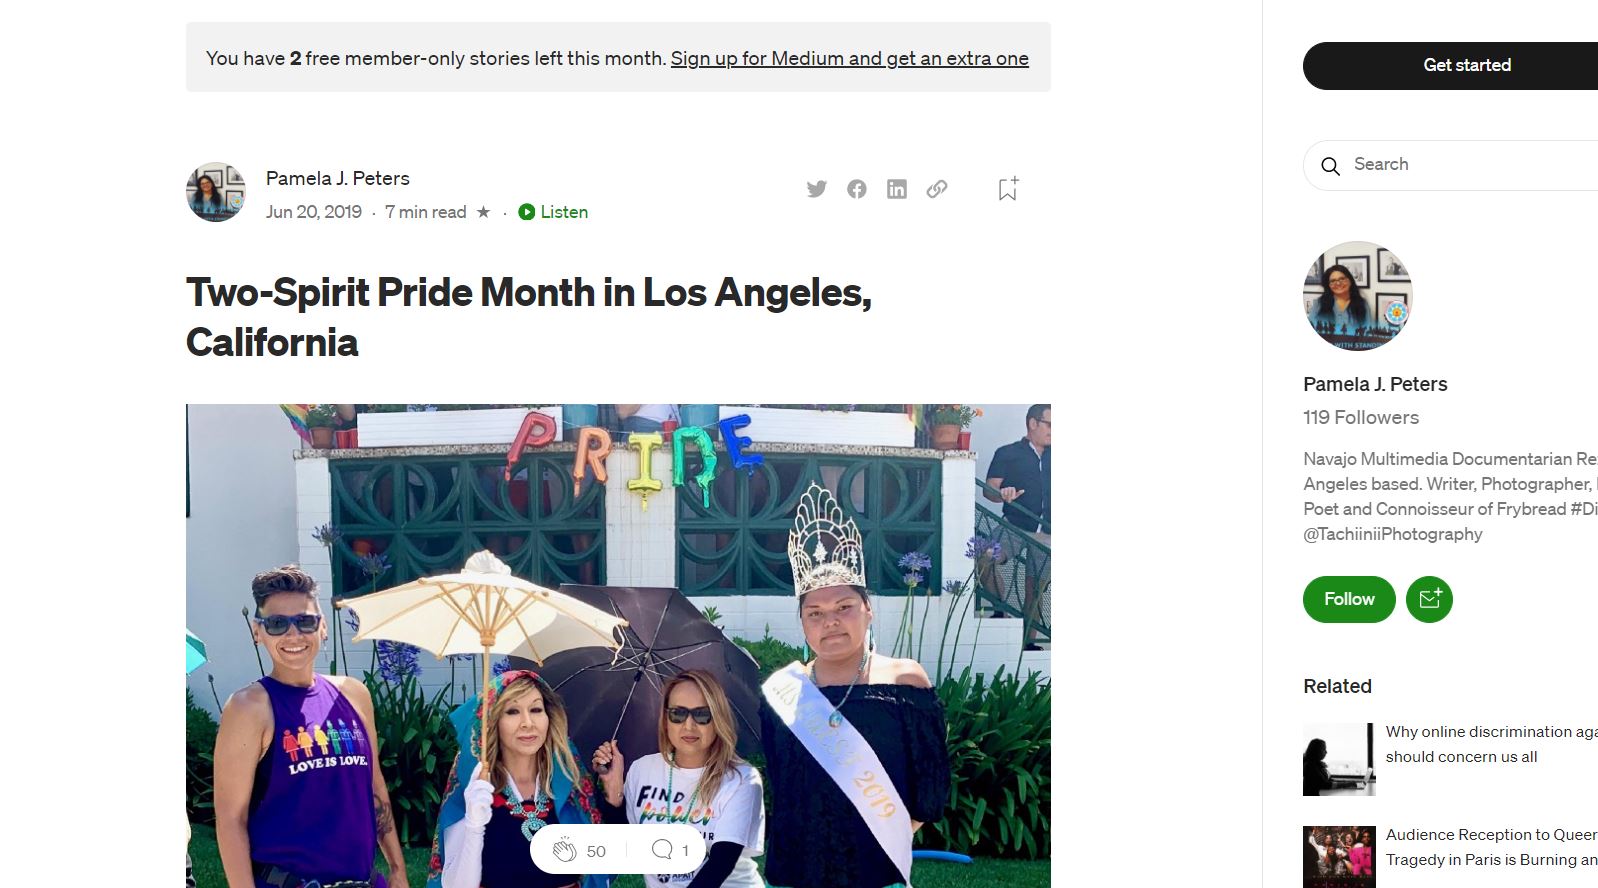 Two-Spirit Pride Month in Los Angeles, California